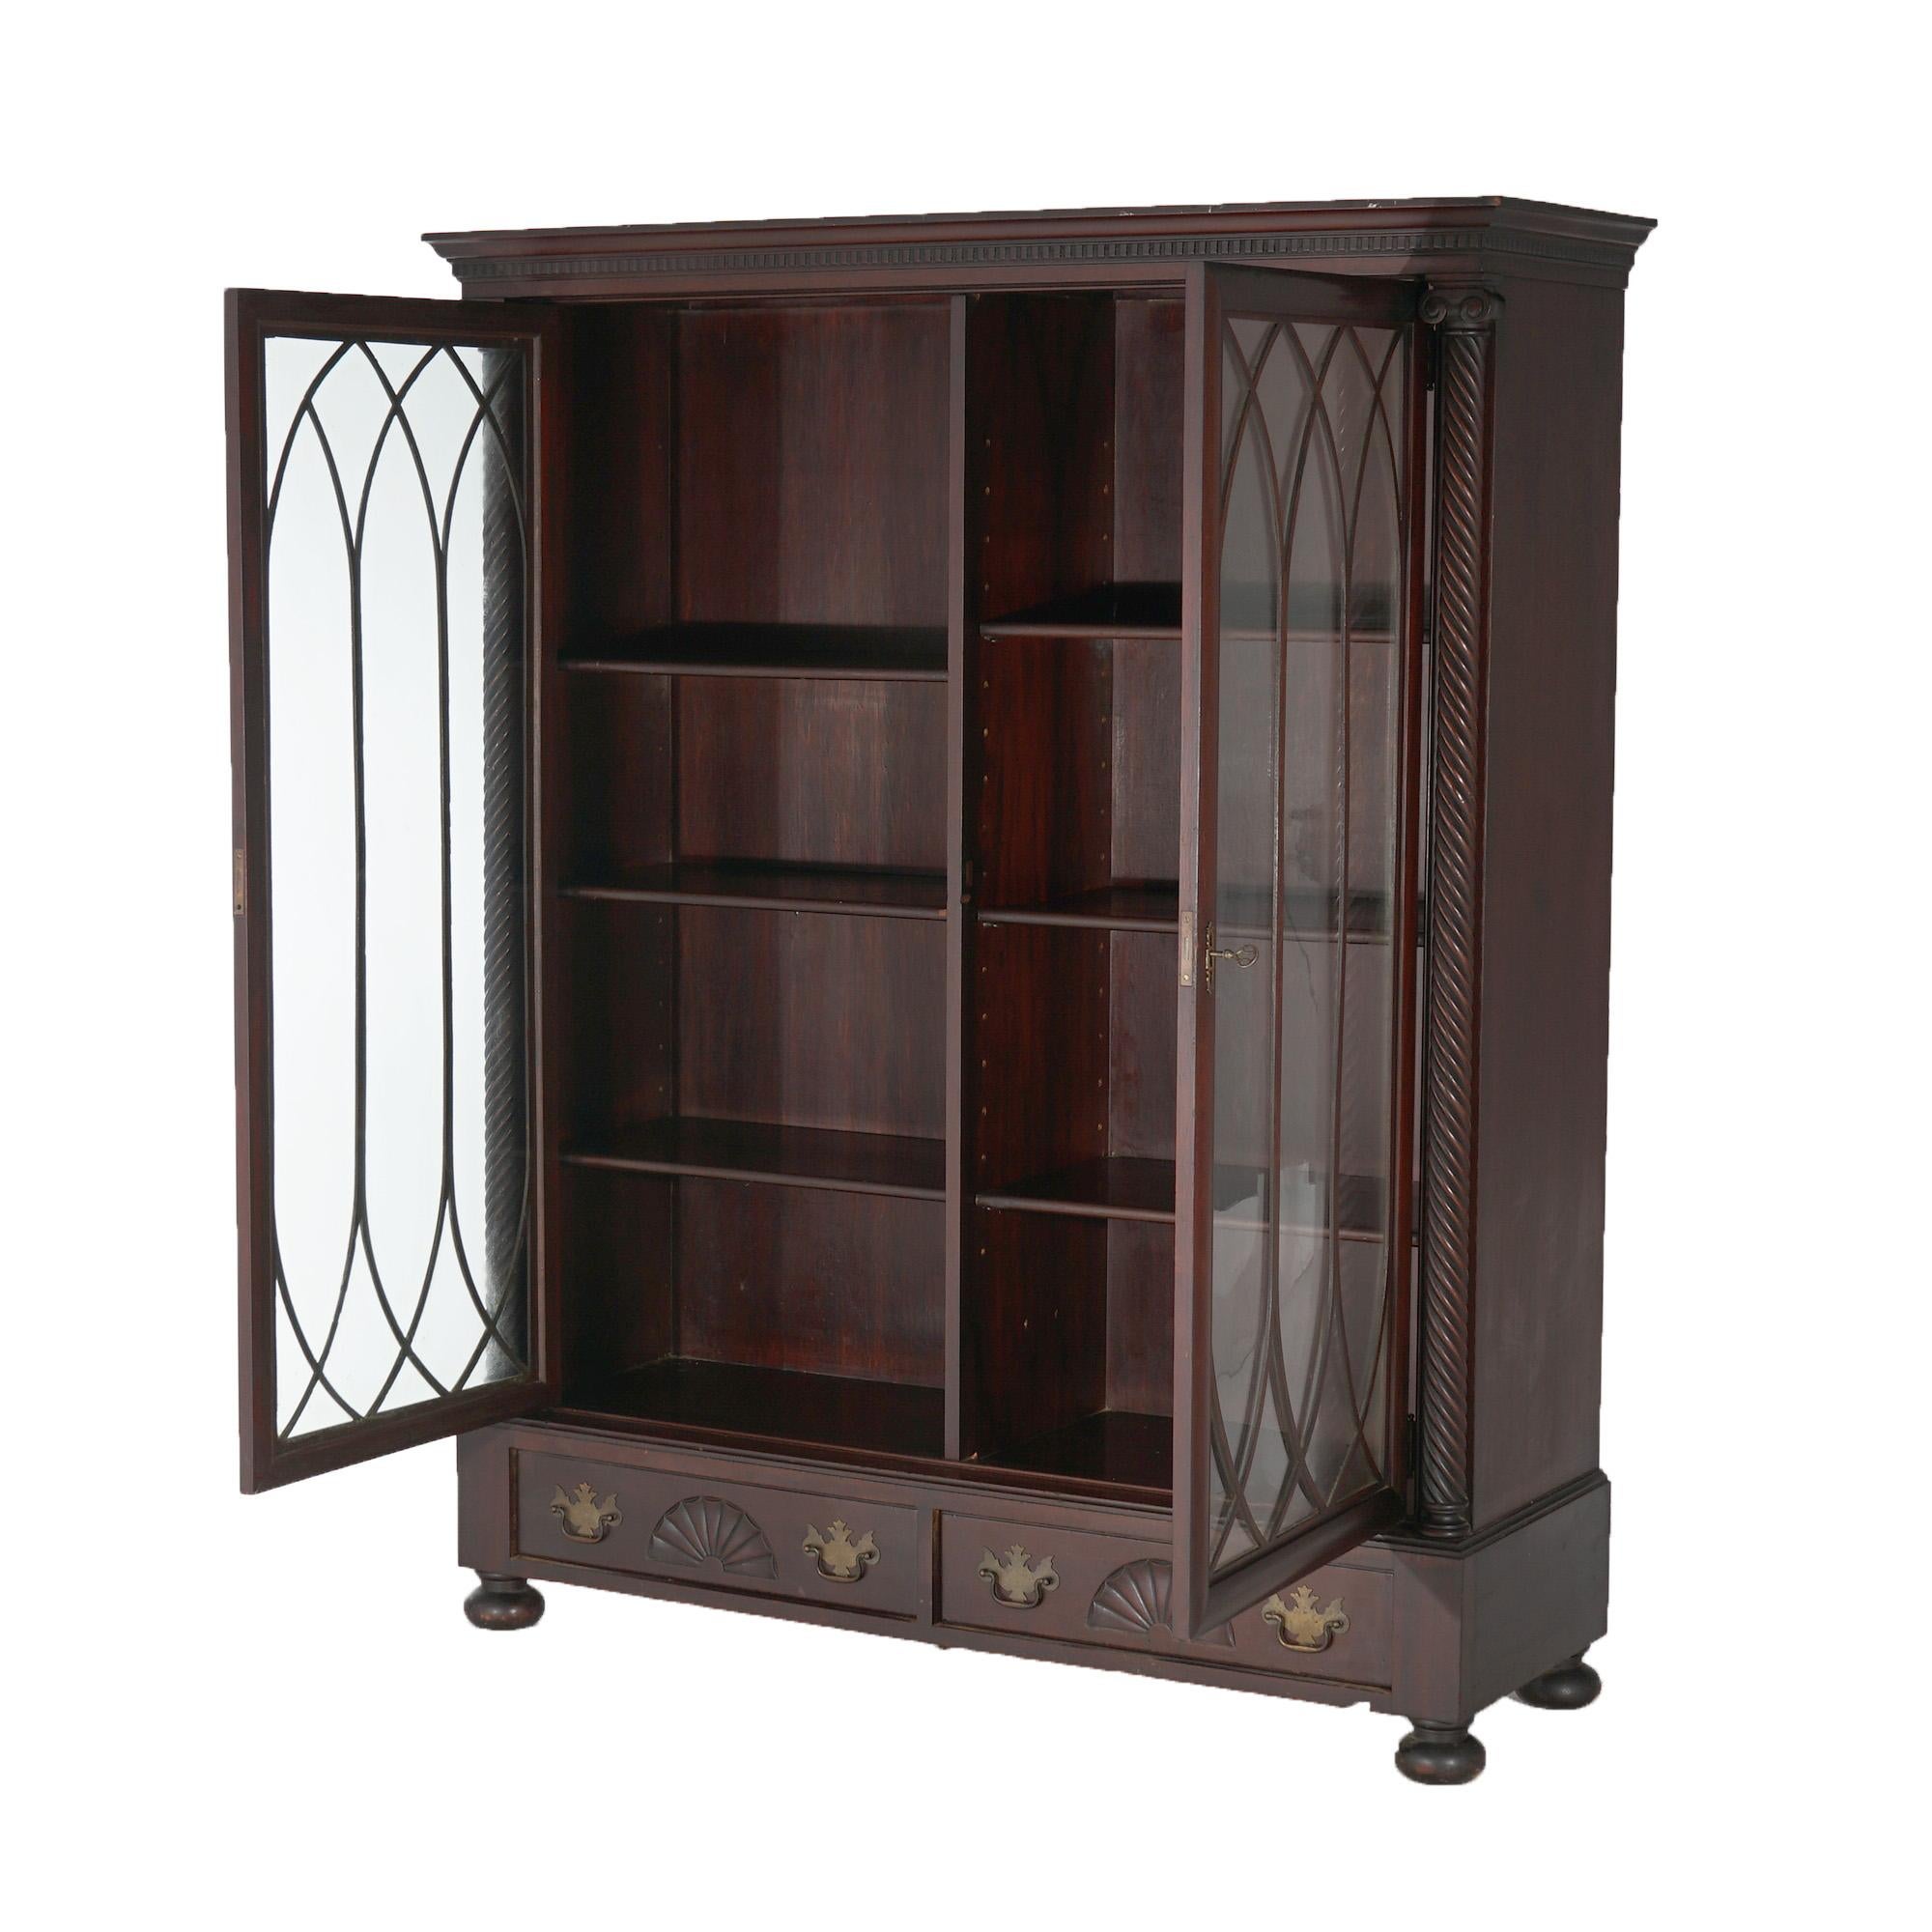 Antique American Empire Classical Carved Mahogany Double Door Bookcase c1890 For Sale 5